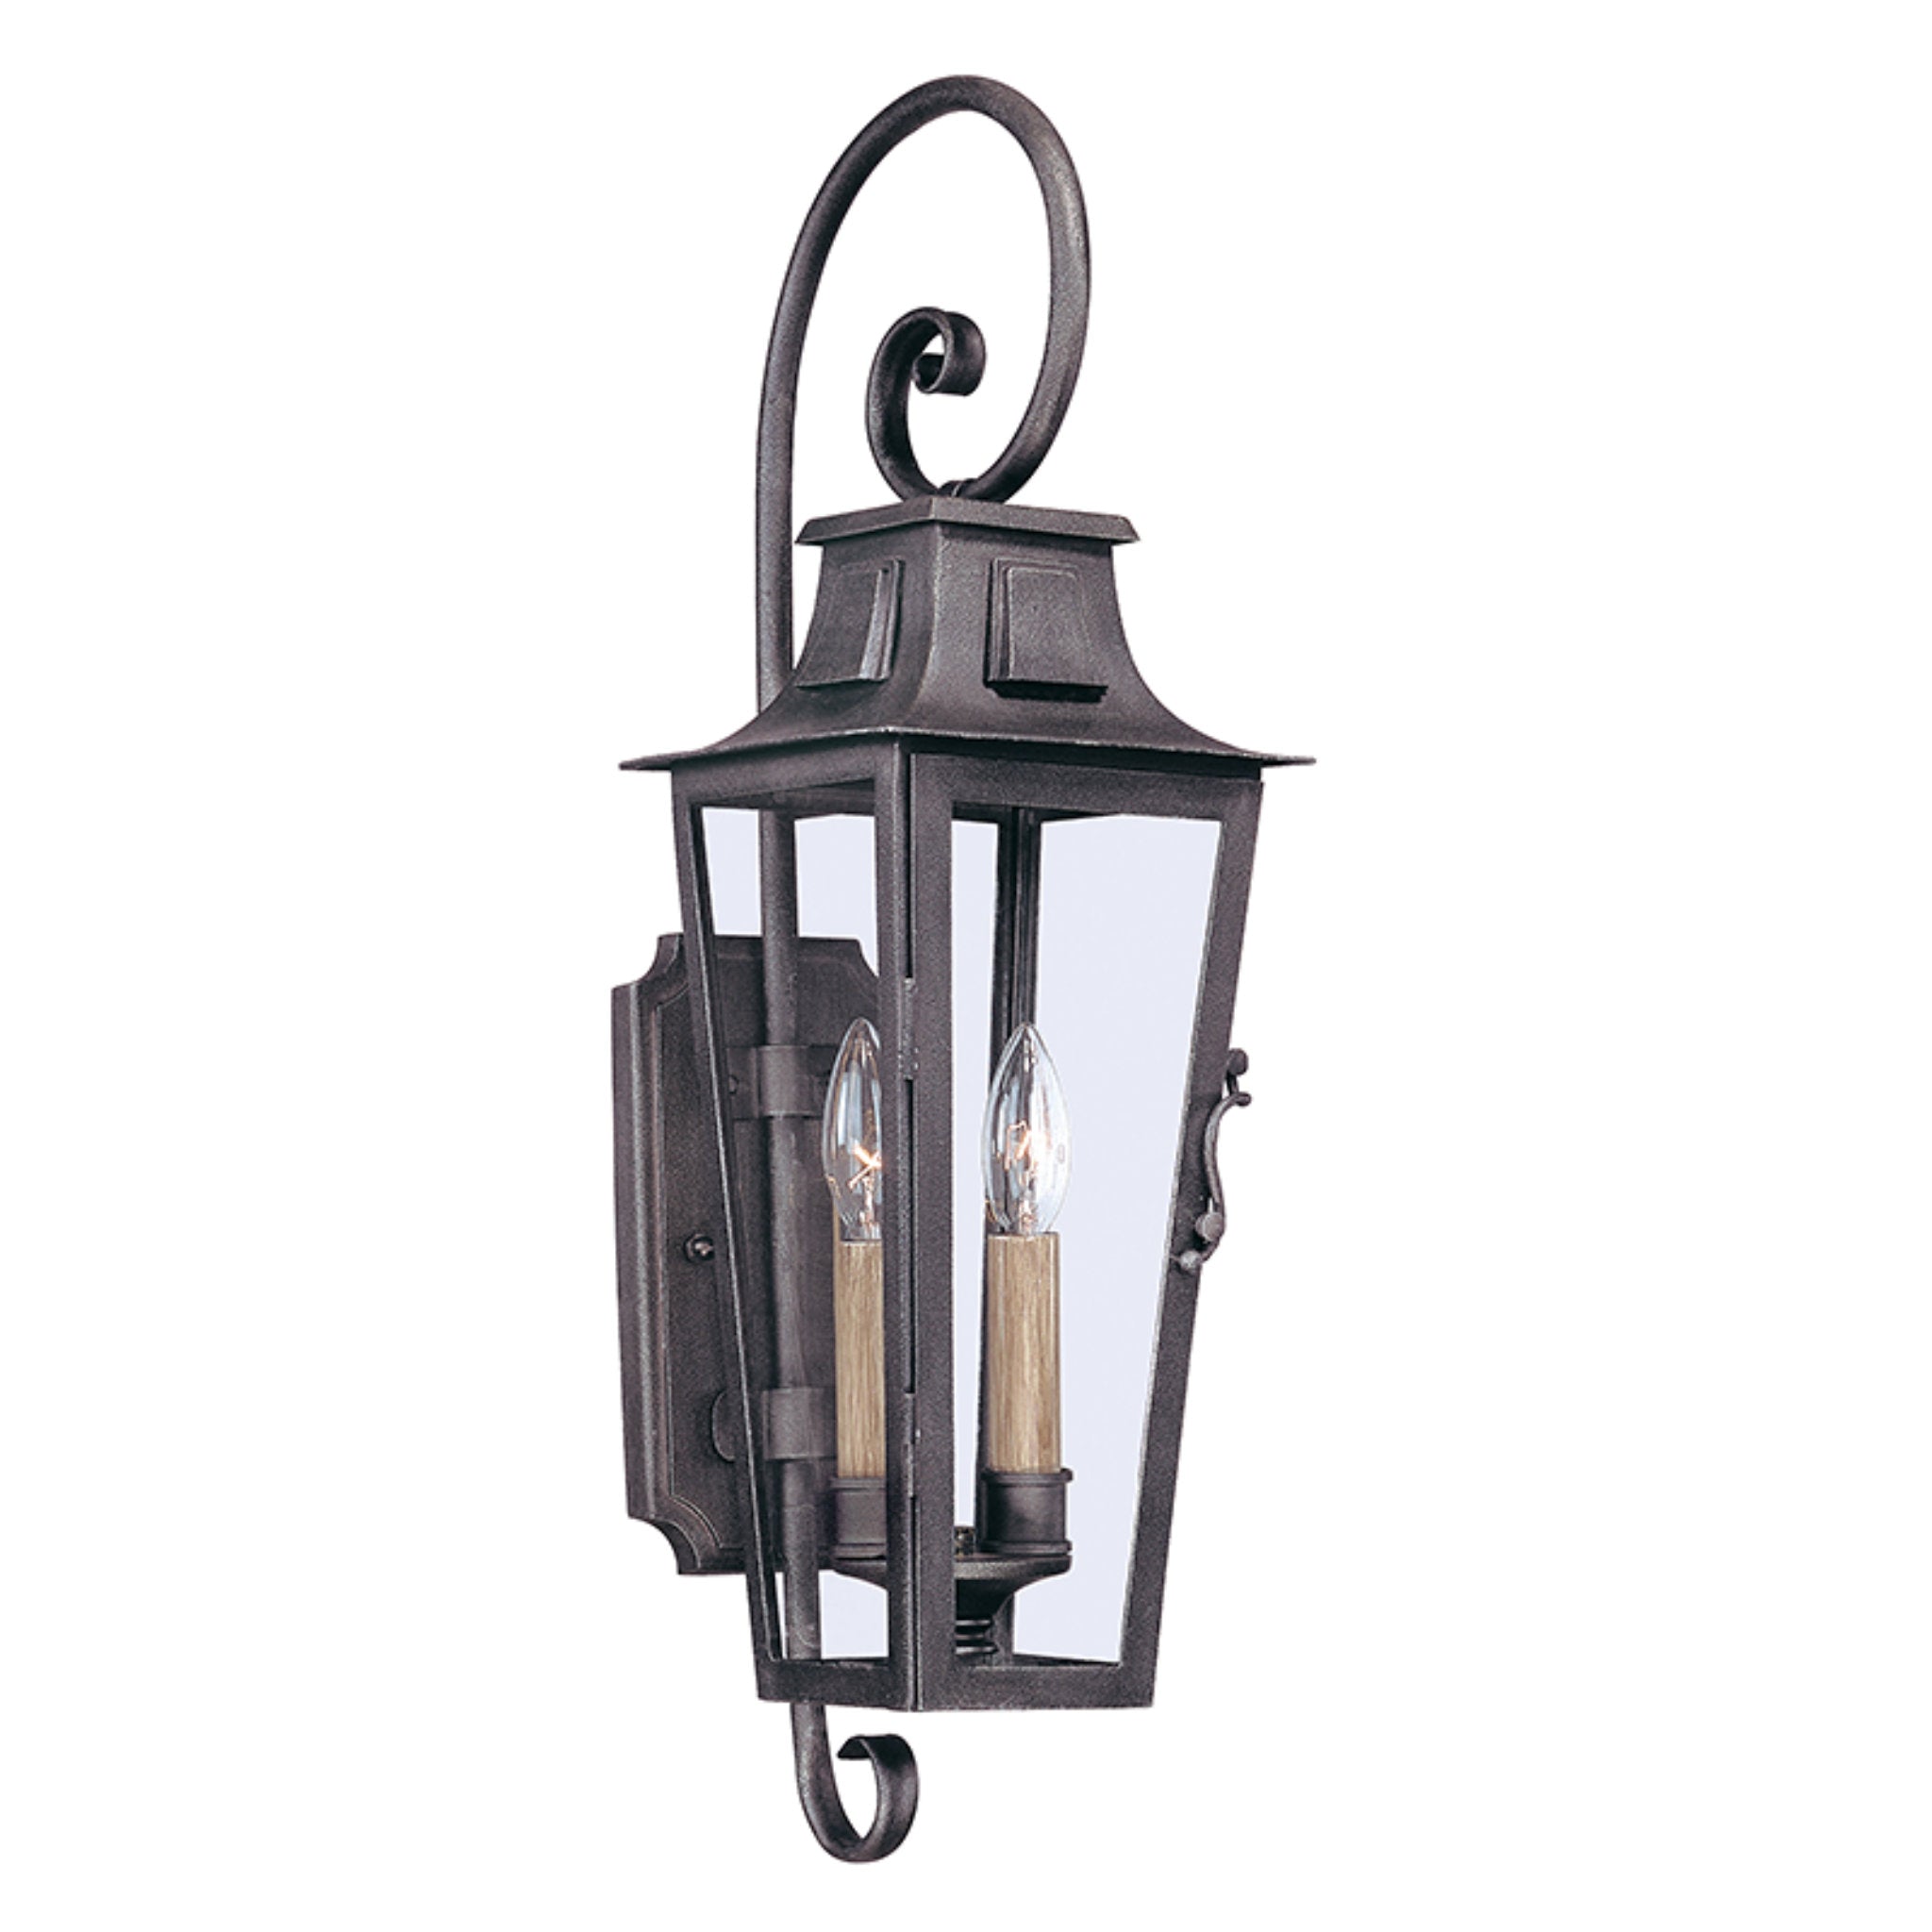 Parisian Square 2 Light Wall Sconce in Aged Pewter